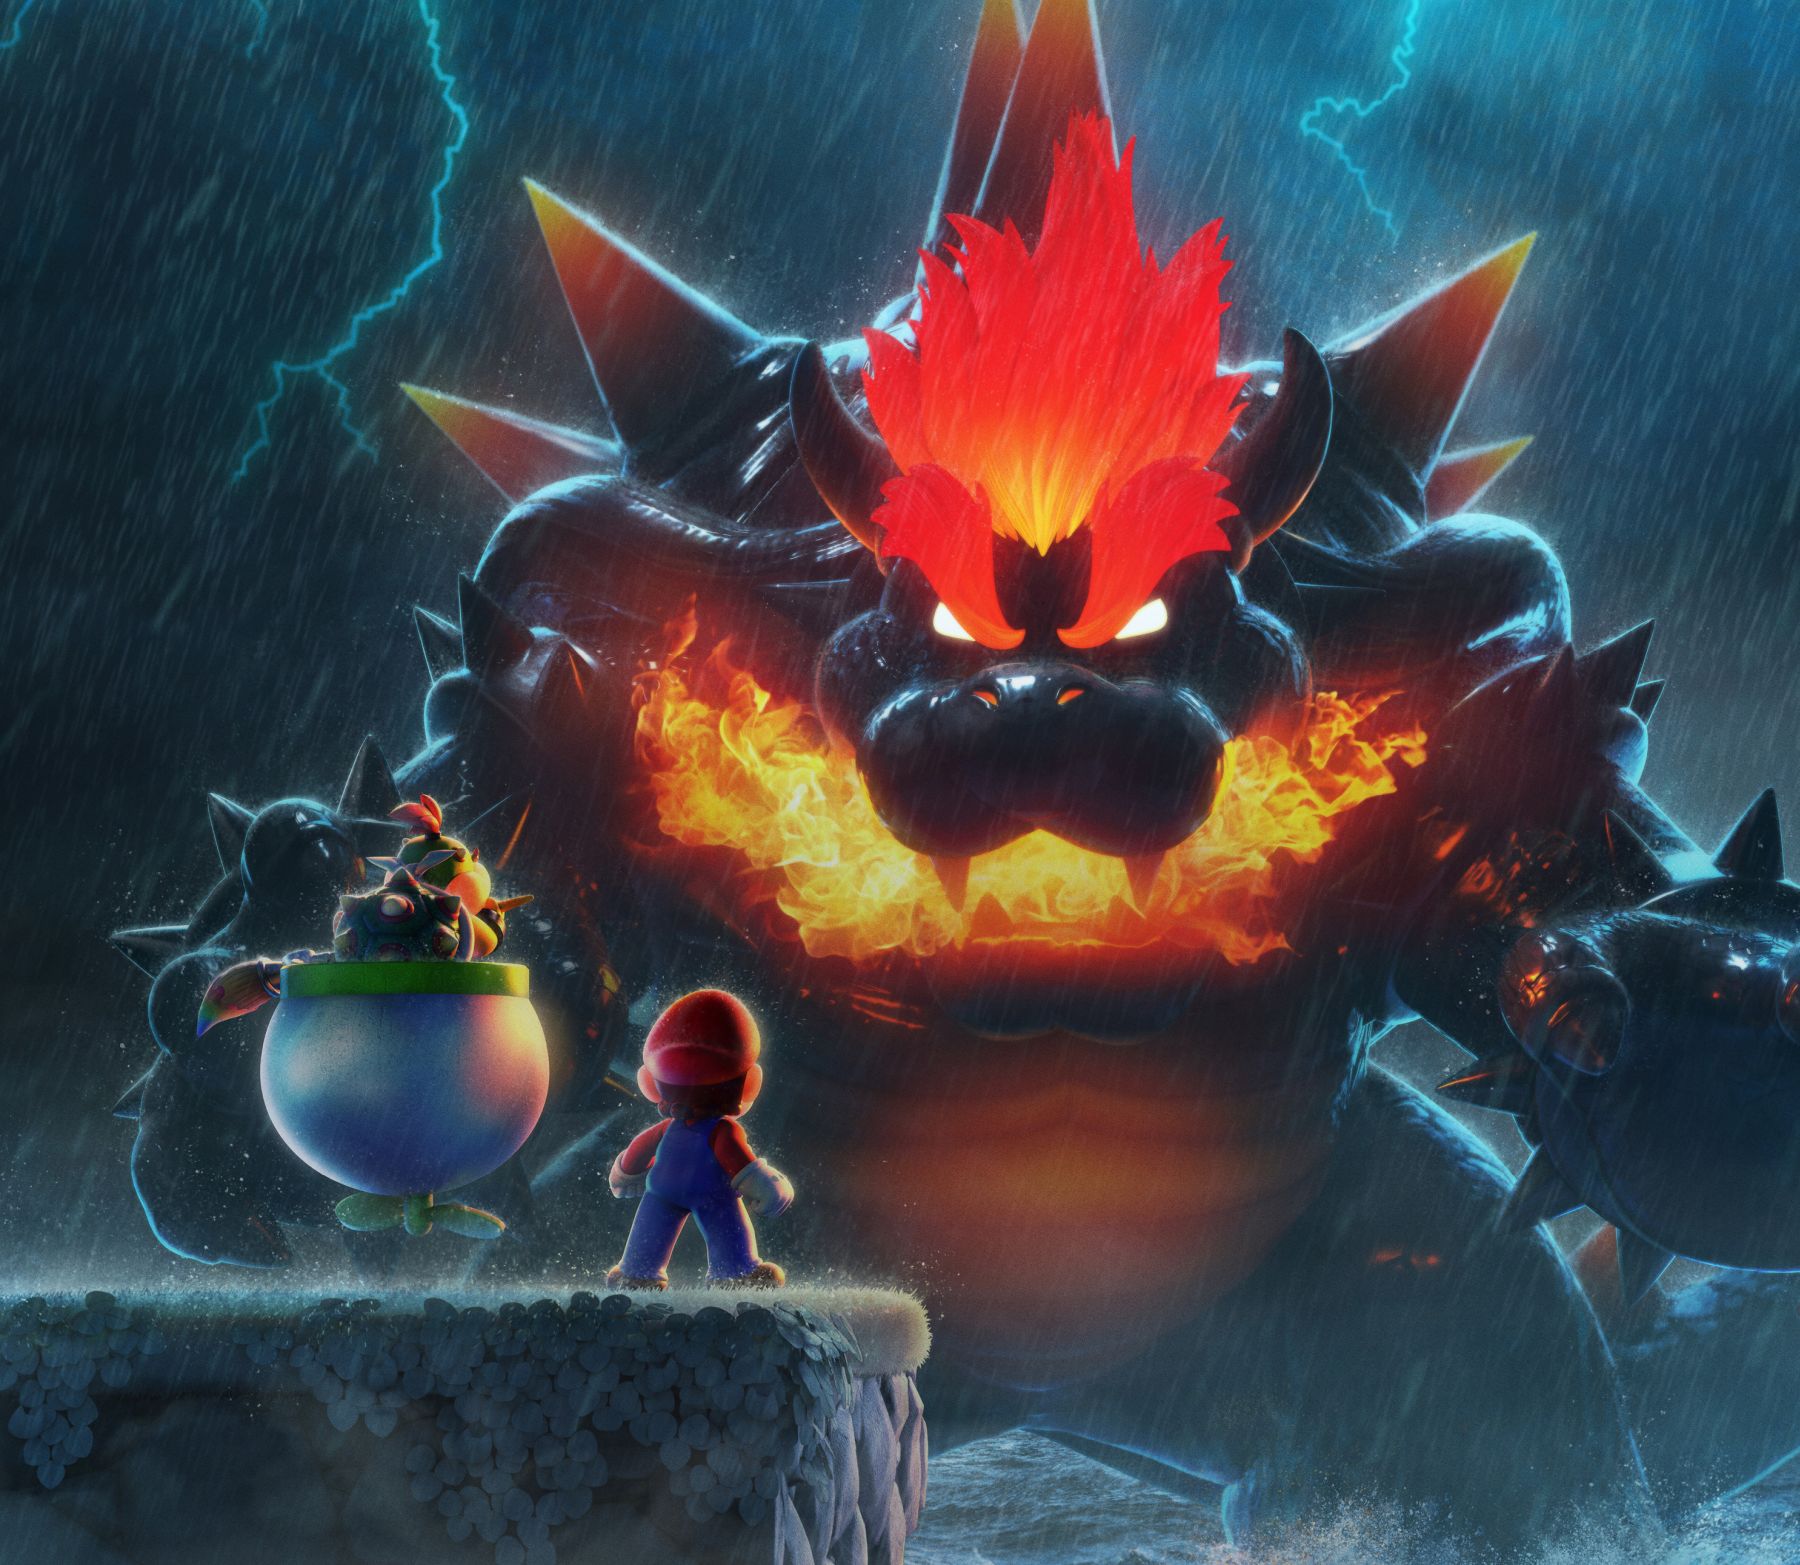 Image for Super Mario 3D World + Bowser’s Fury reviews round-up, all the scores